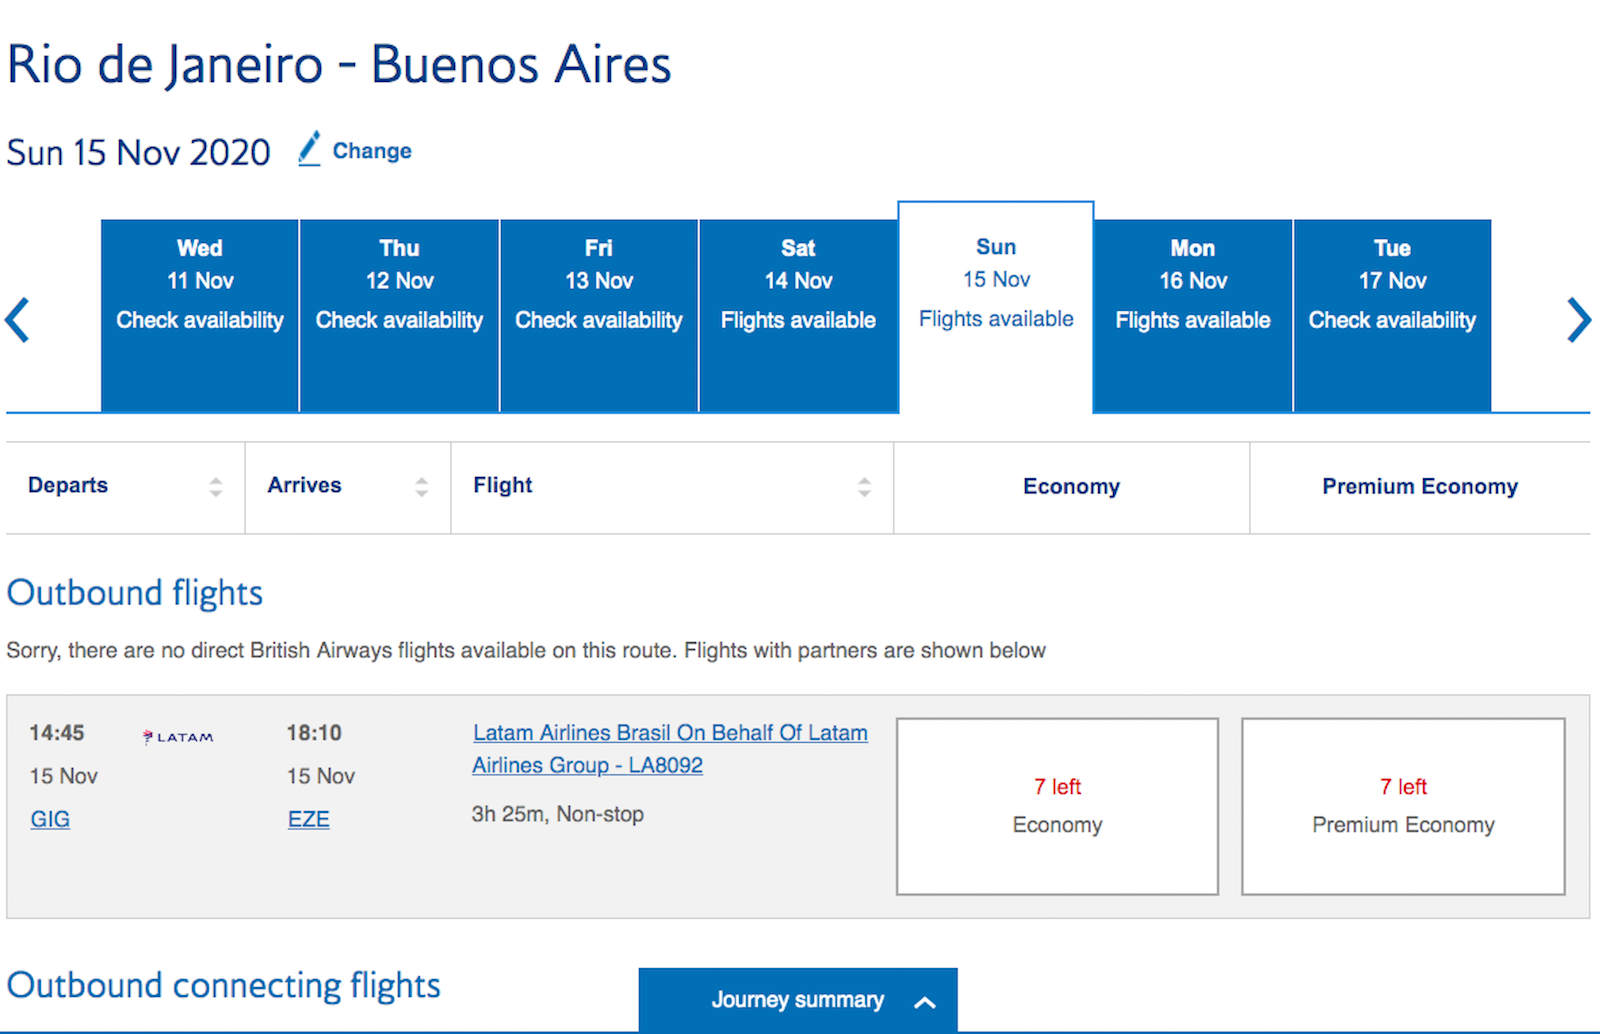 LATAM flight from Rio to Buenos Aires